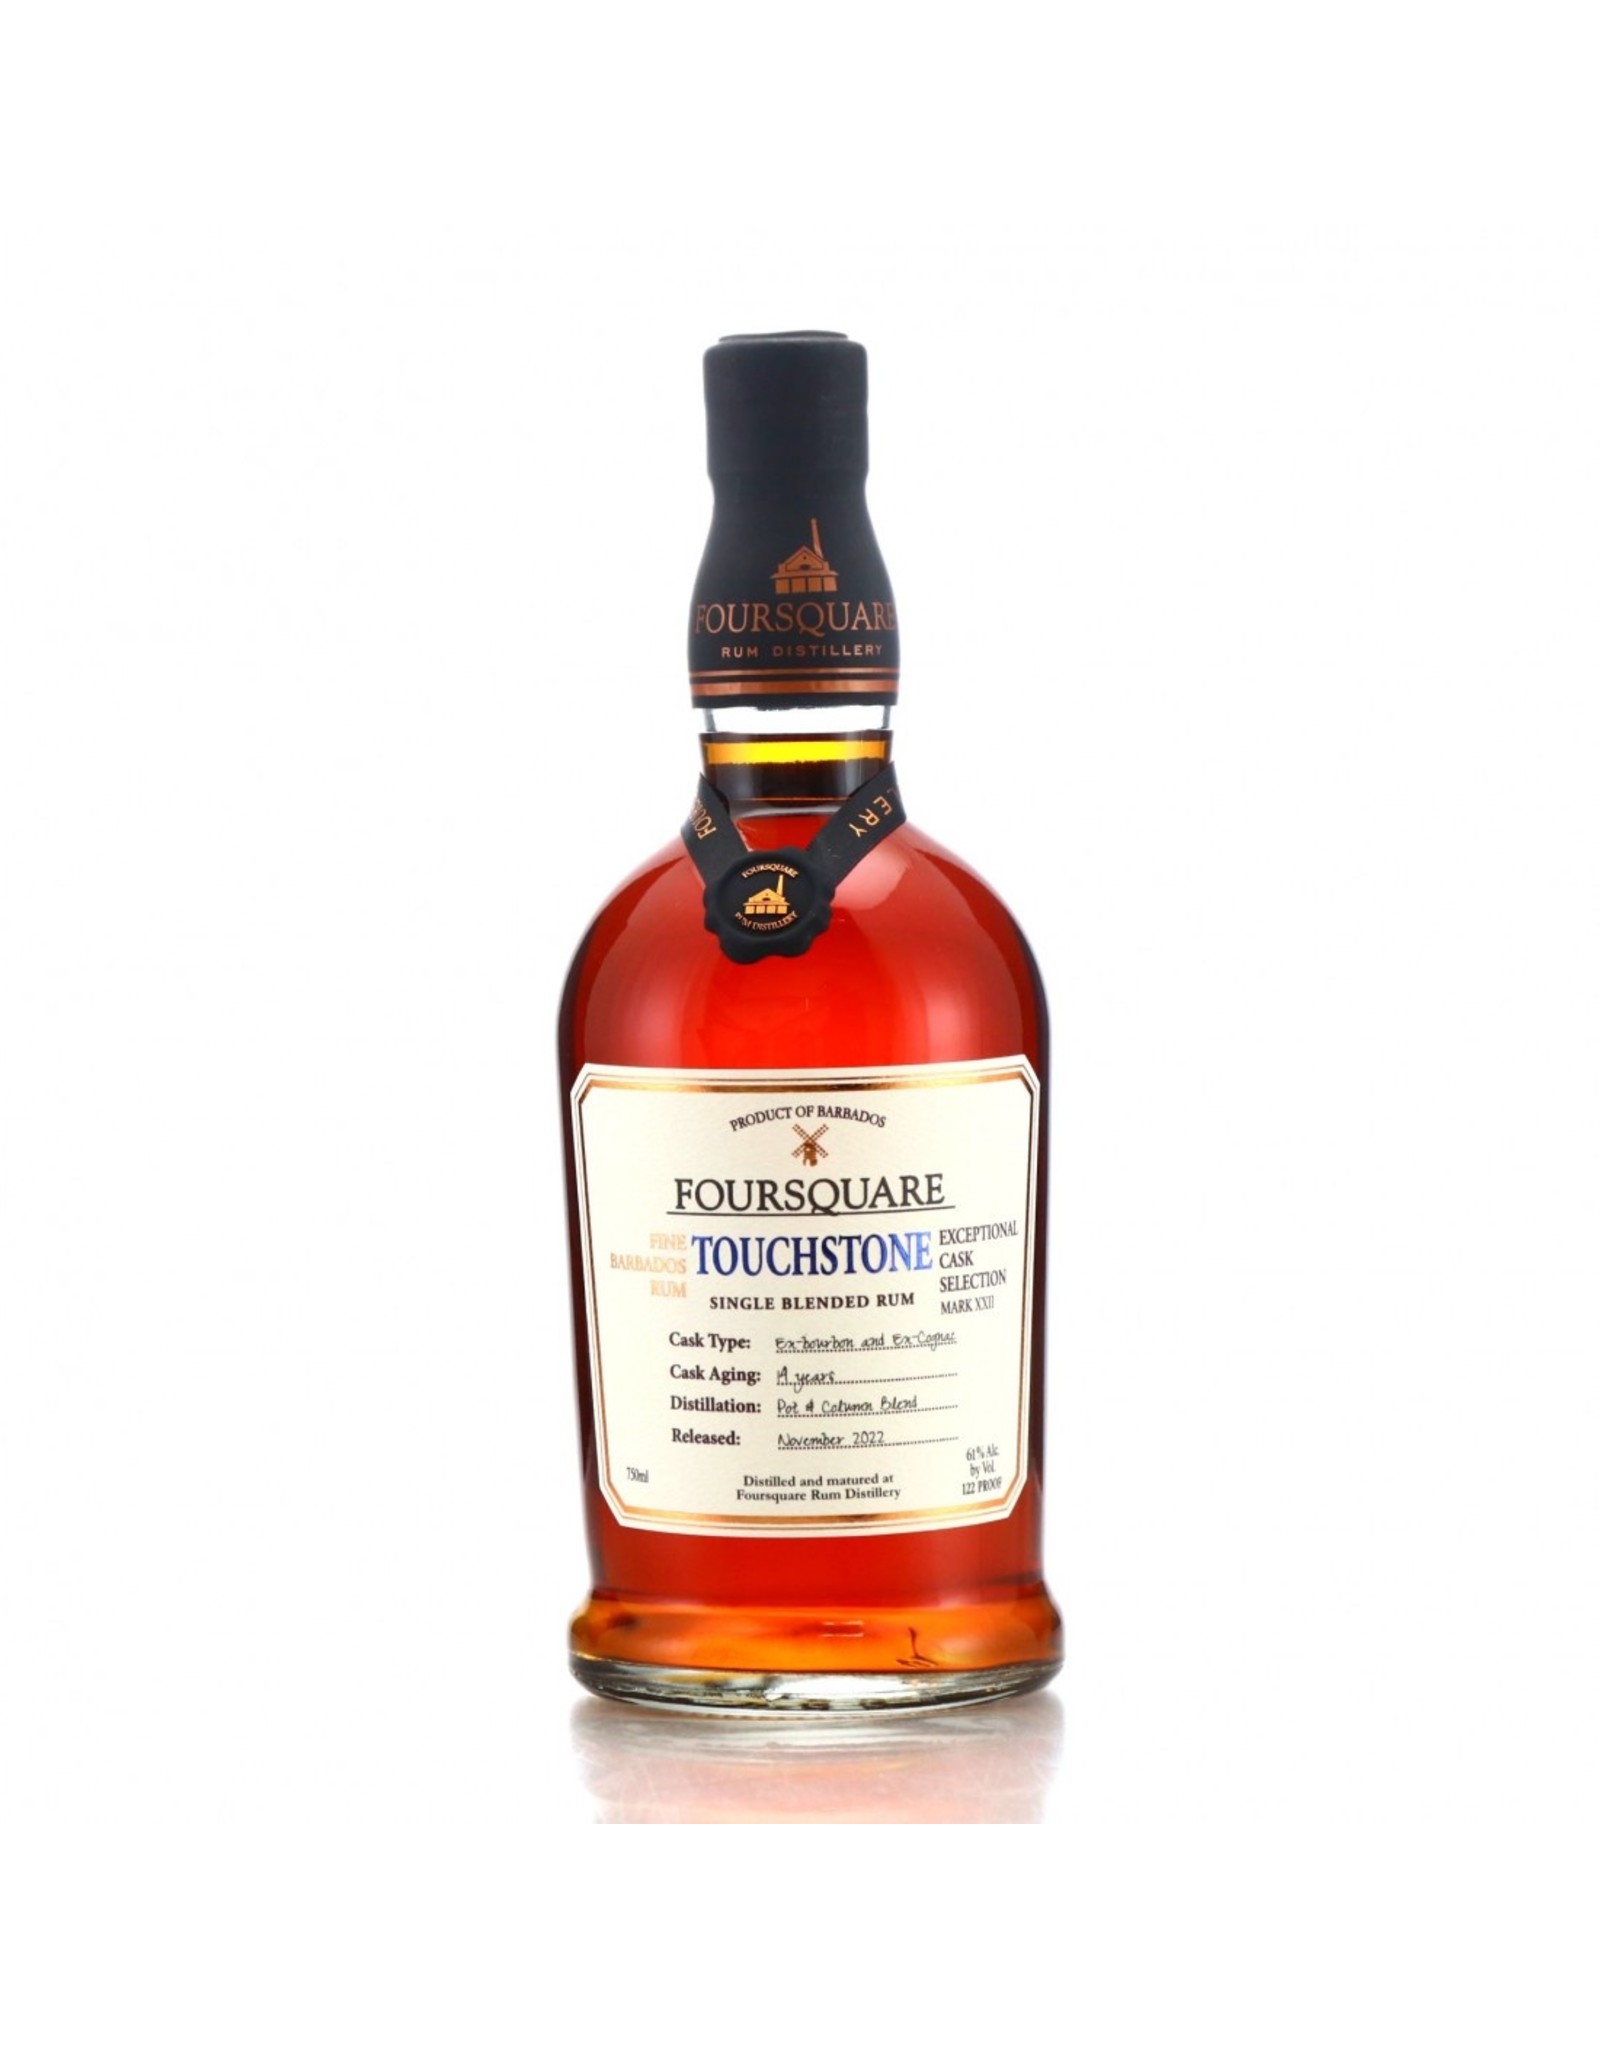 Foursquare Touchstone 14 Year Barbados Rum Exceptional Cask Selection